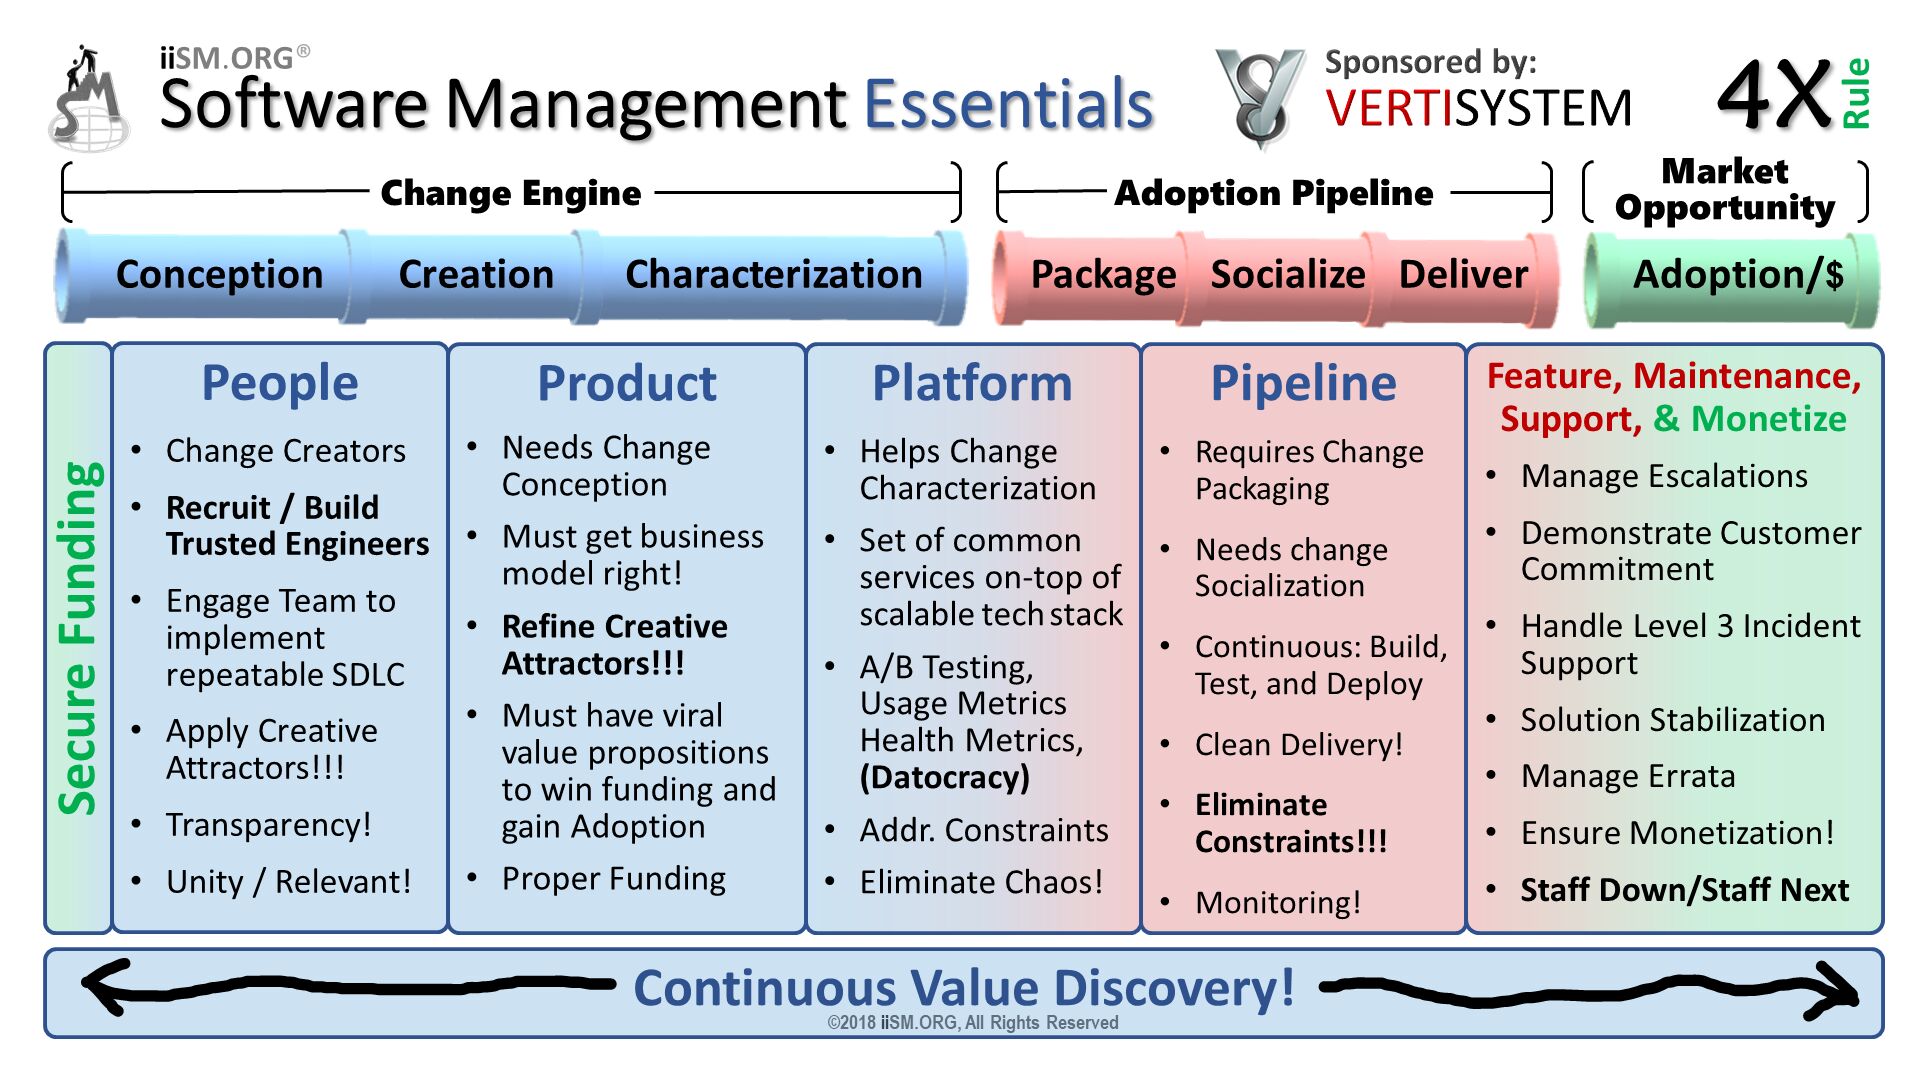 Software Management Essentials. ©2018 iiSM.ORG, All Rights Reserved. People
Change Creators
Recruit / Build Trusted Engineers
Engage Team to implement repeatable SDLC 
Apply Creative Attractors!!!
Transparency!
Unity / Relevant!

. Product
Needs Change Conception
Must get business model right!
Refine Creative Attractors!!!
Must have viral value propositions to win funding and gain Adoption
Proper Funding
. Platform
Helps Change Characterization
Set of common services on-top of scalable tech stack 
A/B Testing, Usage Metrics Health Metrics,(Datocracy)
Addr. Constraints
Eliminate Chaos!

. Pipeline
Requires Change Packaging 
Needs change Socialization
Continuous: Build, Test, and Deploy
Clean Delivery!
Eliminate Constraints!!!
Monitoring!
. Feature, Maintenance, Support, & Monetize
Manage Escalations
Demonstrate Customer Commitment
Handle Level 3 Incident Support
Solution Stabilization
Manage Errata
Ensure Monetization!
Staff Down/Staff Next
. Secure Funding. iiSM.ORG®. 